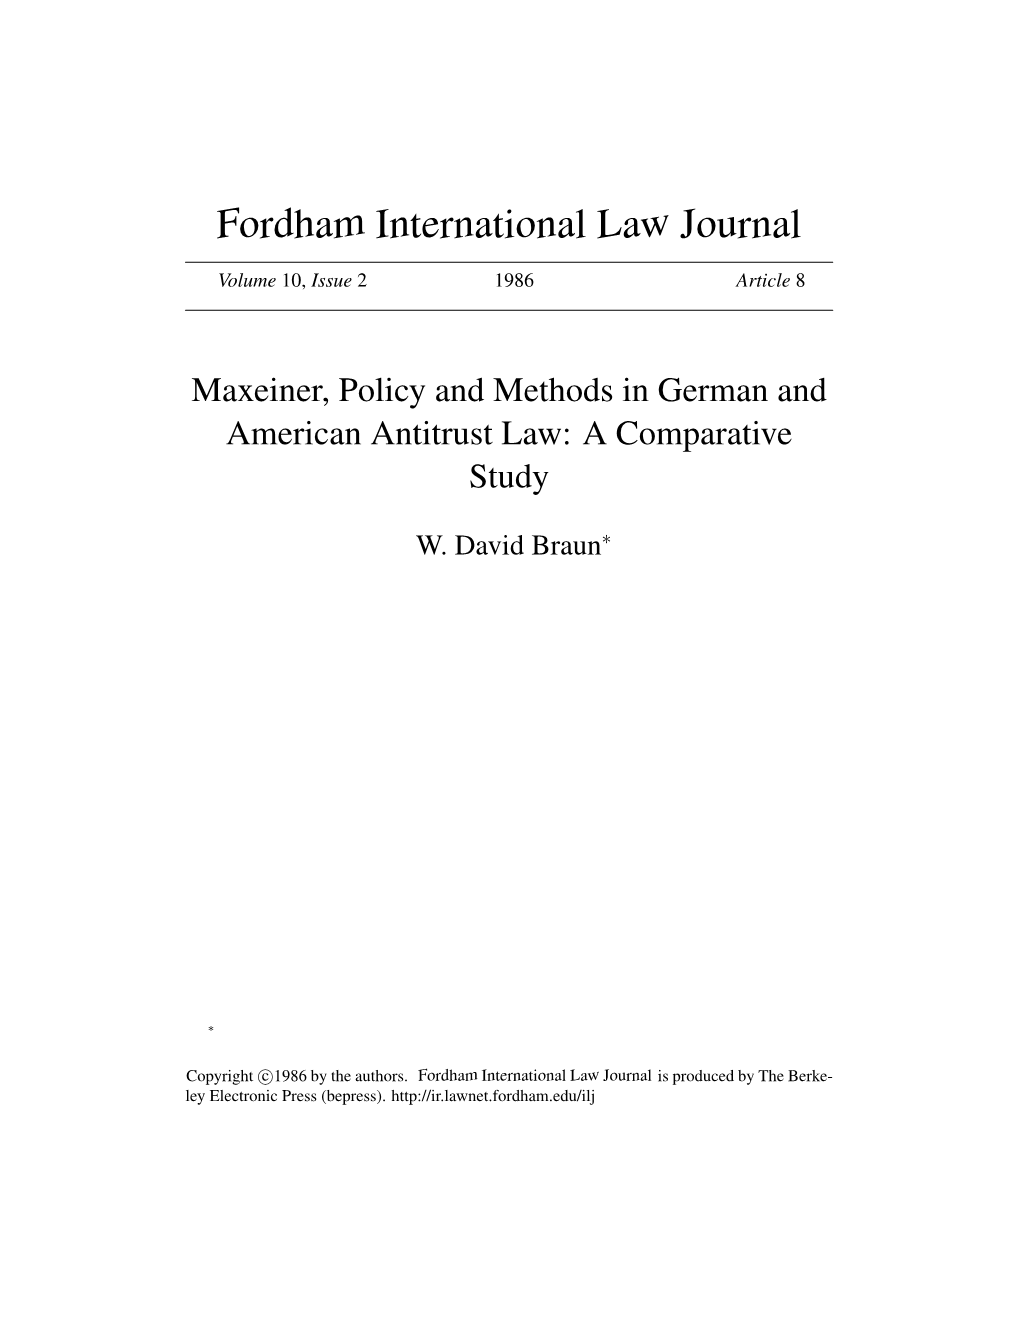 Maxeiner, Policy and Methods in German and American Antitrust Law: a Comparative Study